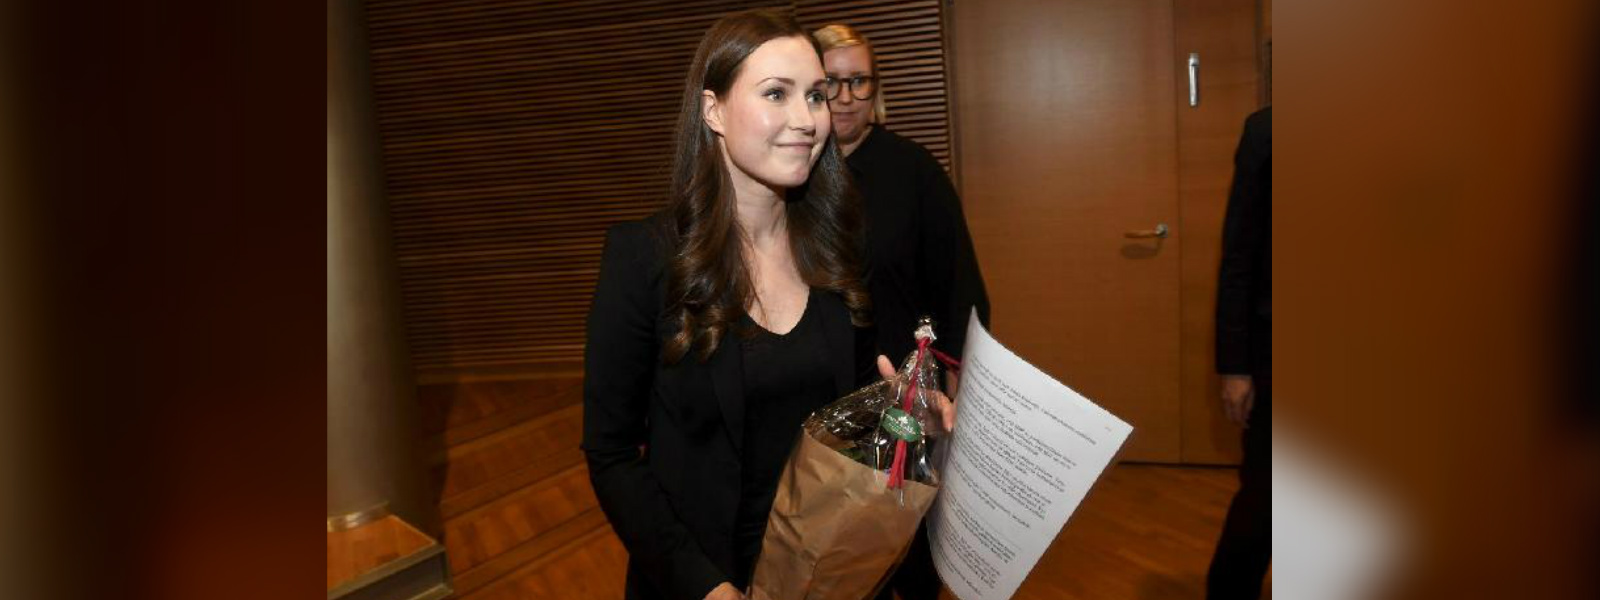 Finland picks world’s youngest PM to head women-led cabinet